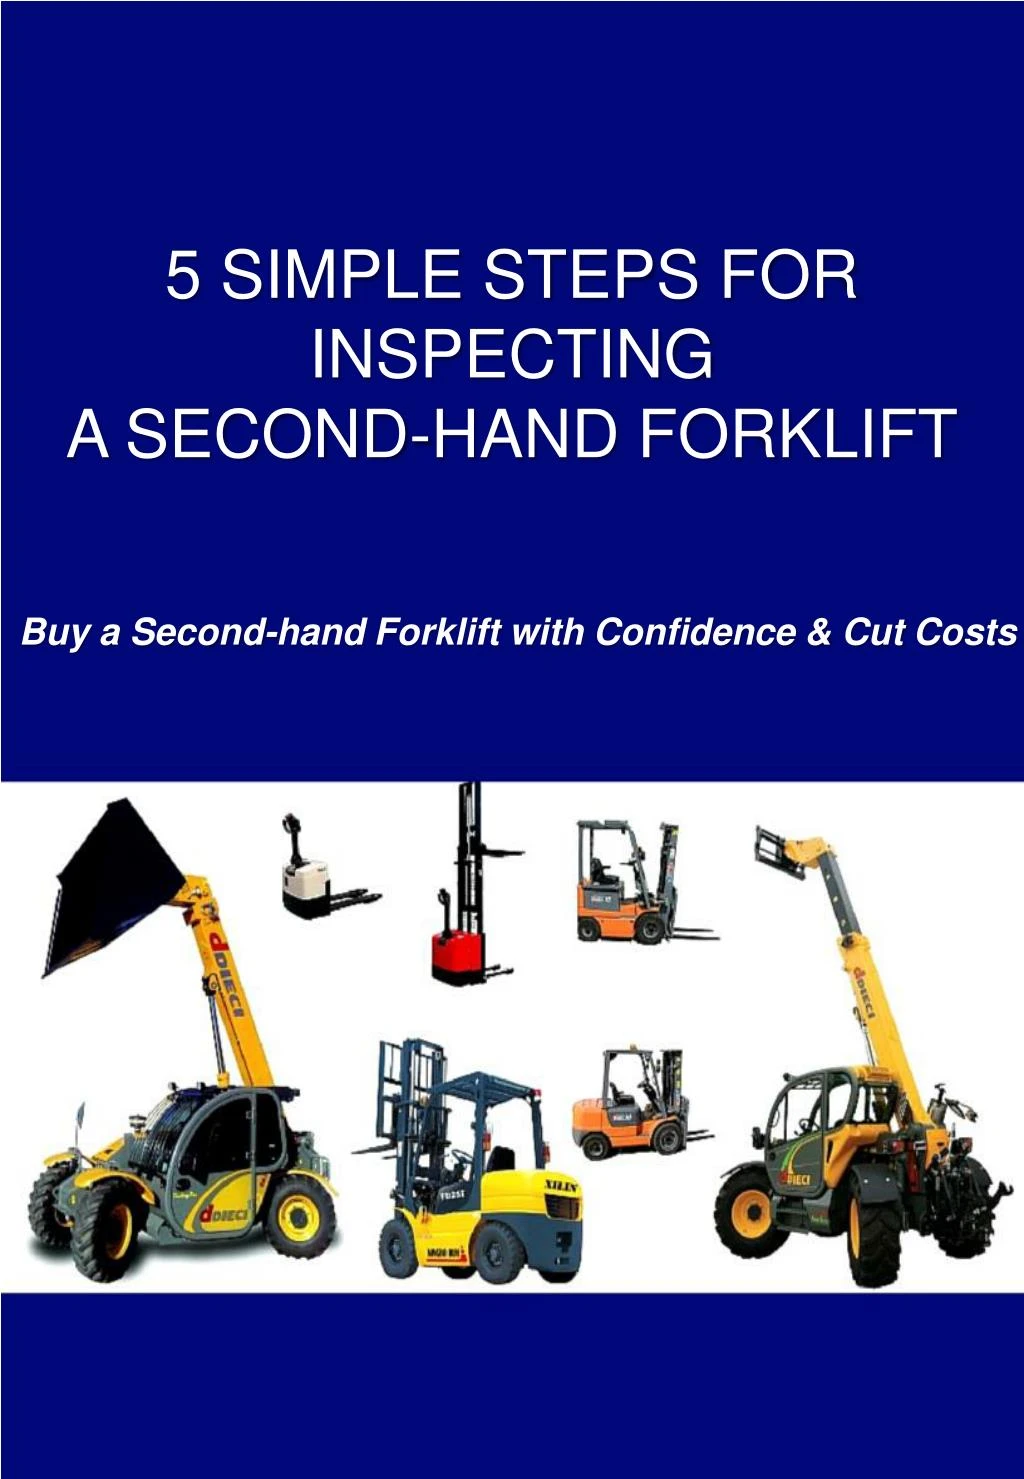 5 simple steps for inspecting a second hand forklift